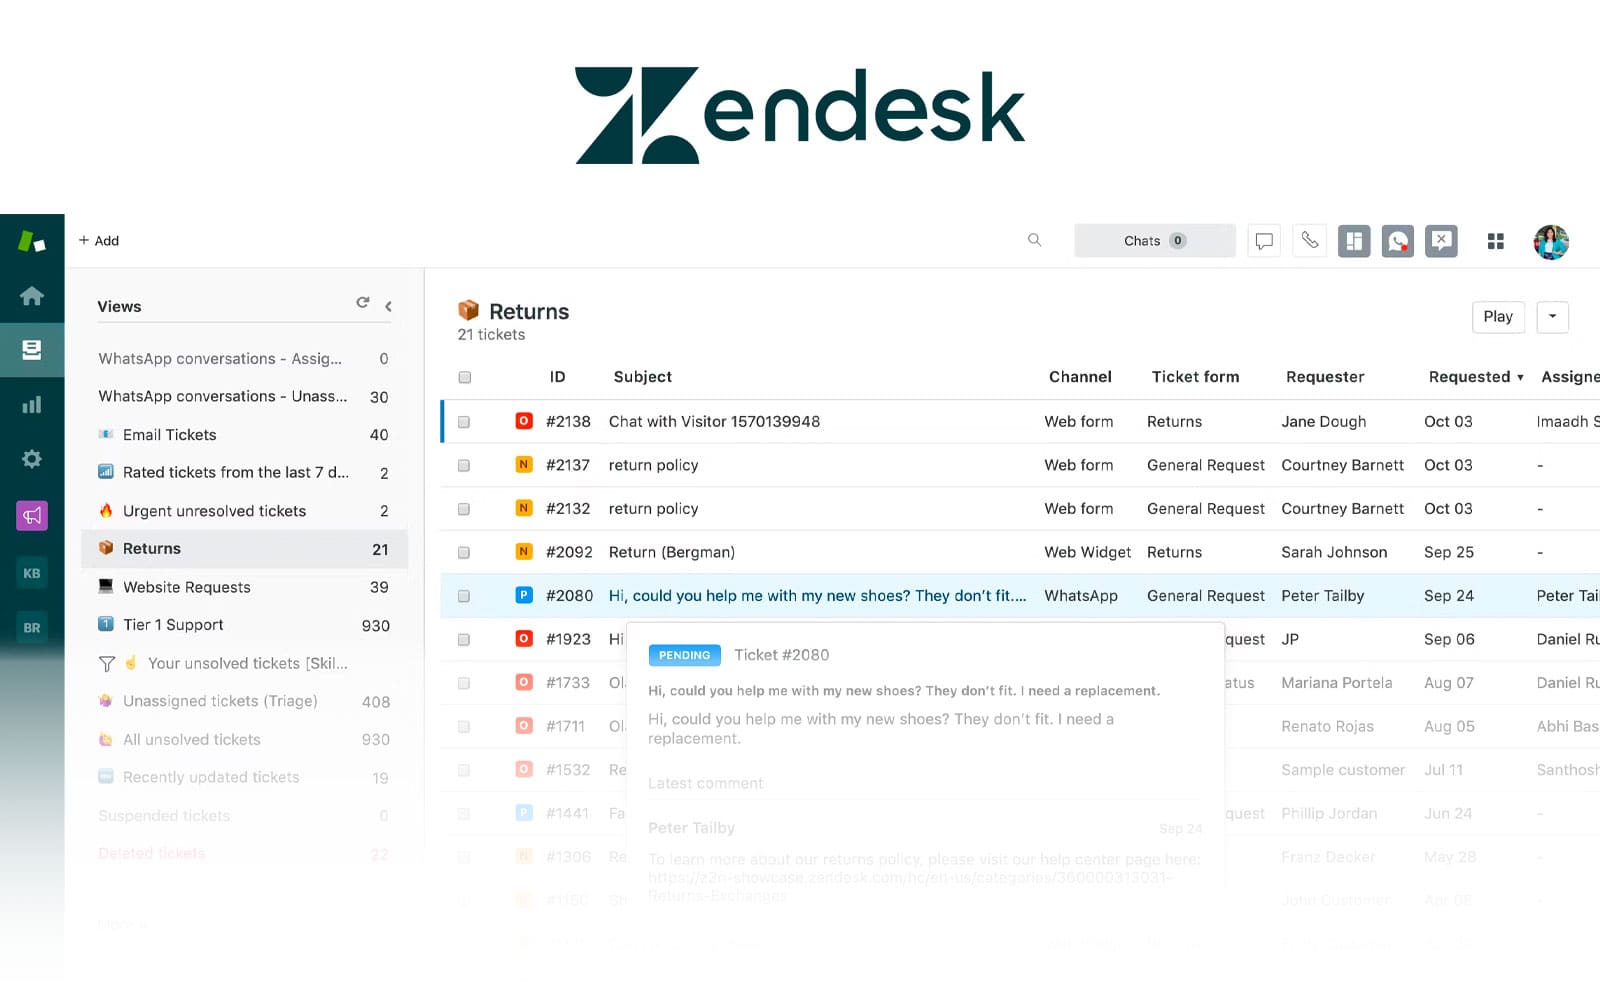 Example of Zendesk's interface.